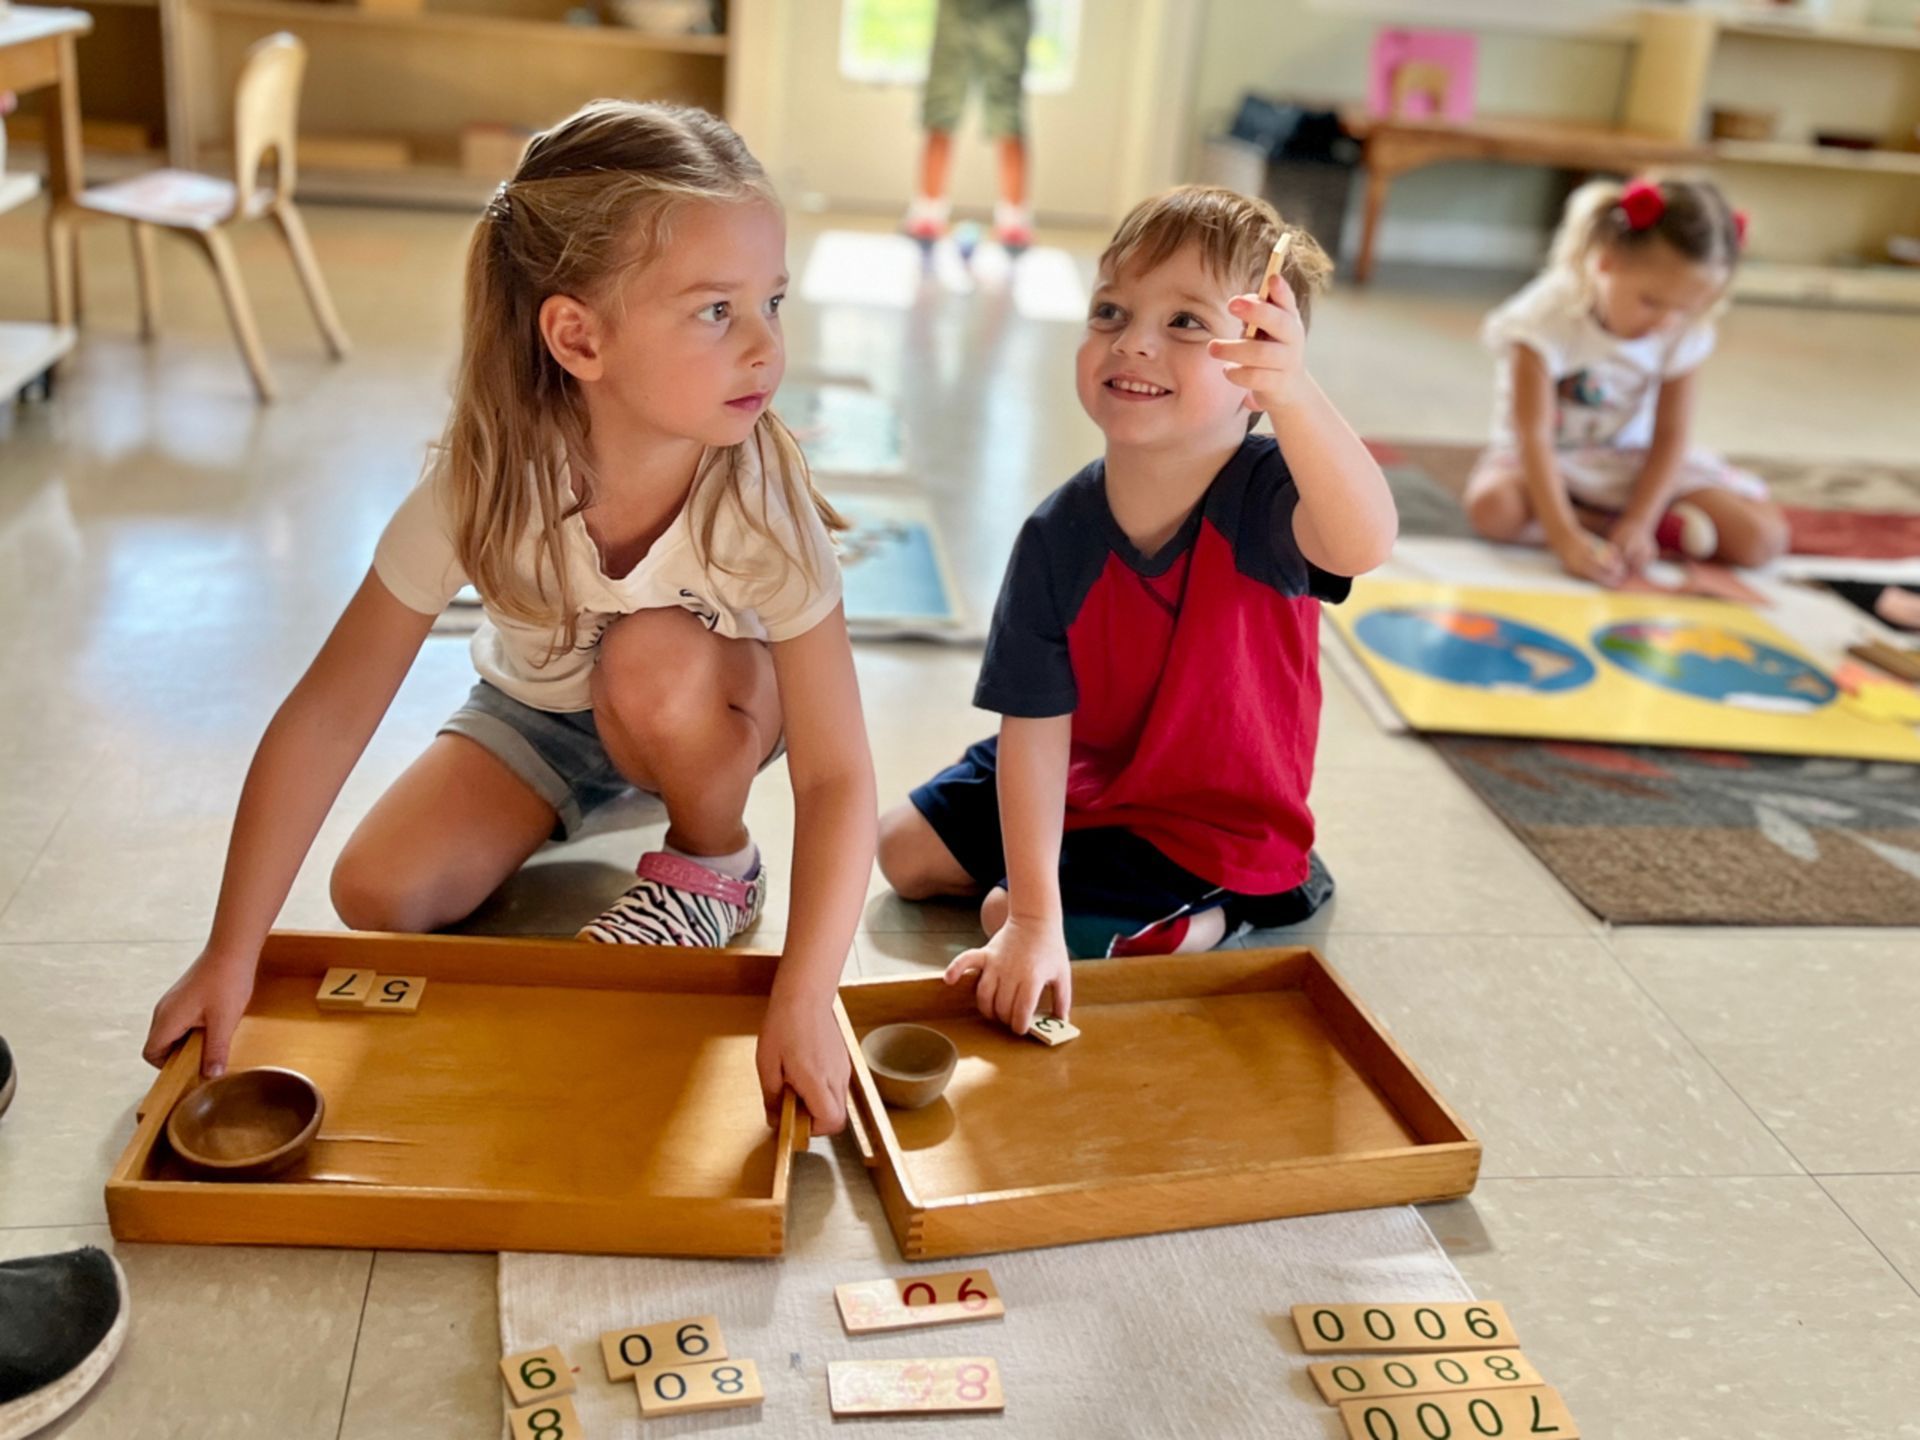 A  boy and a girl are playing with numbers on a tray